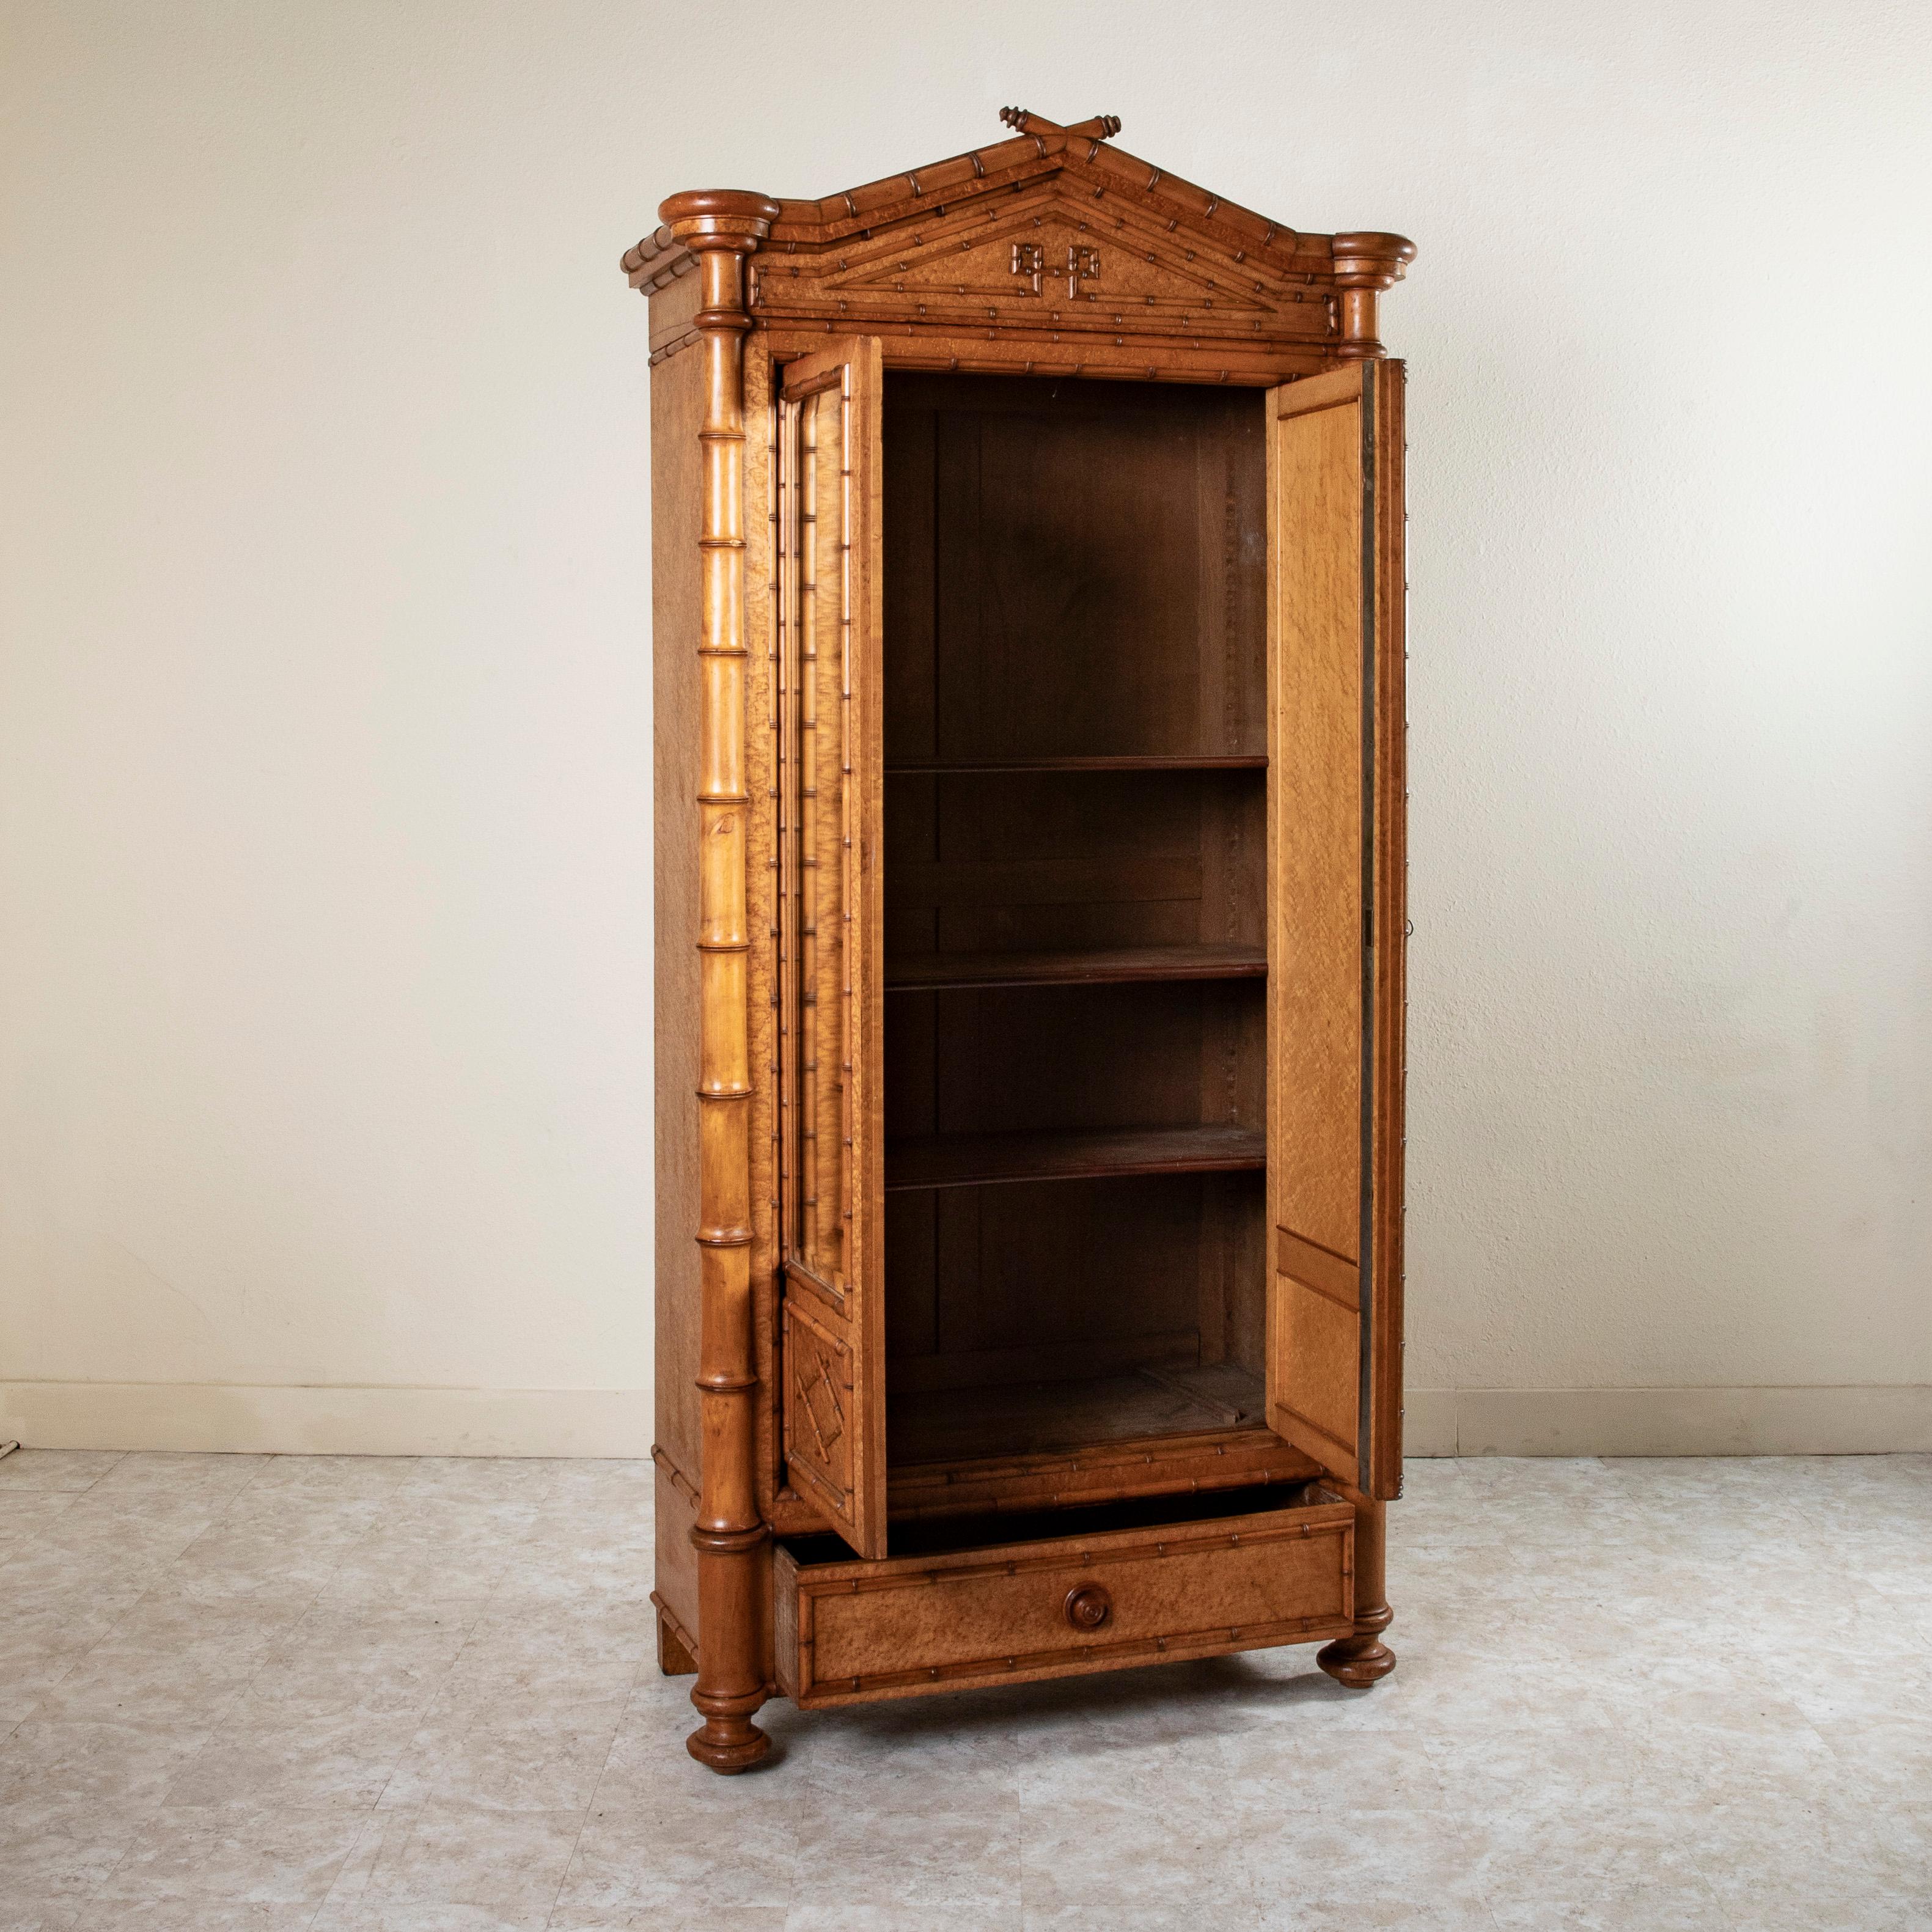 Early 20th Century French Faux Bamboo Armoire or Wardrobe with Mirrors, 96-in H 2